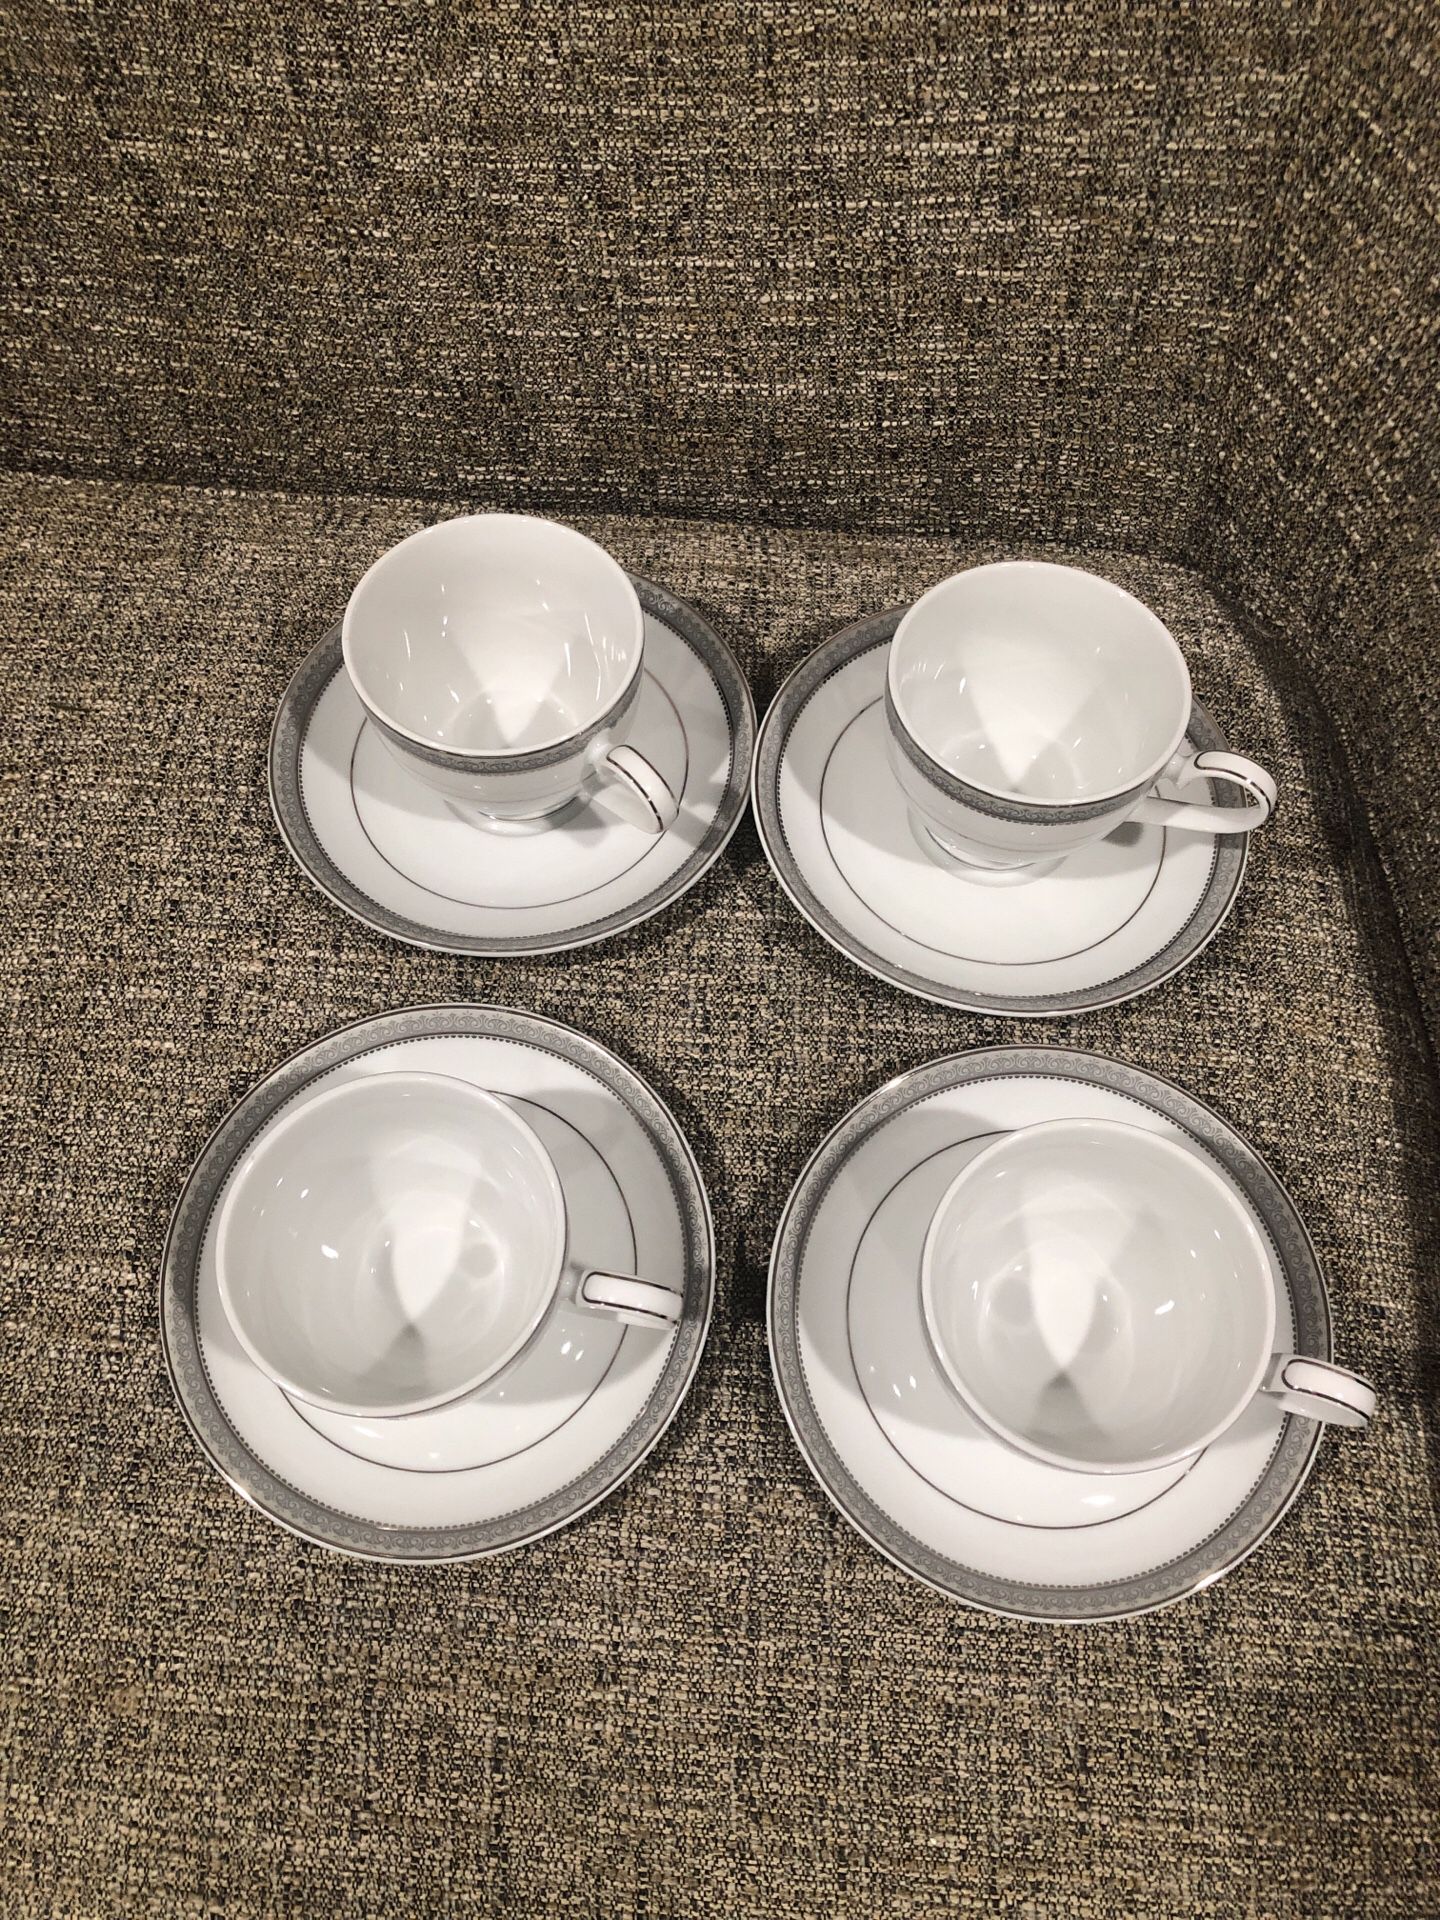 Mikasa 4 Tea cup With Saucers. Please see all the pictures and the description